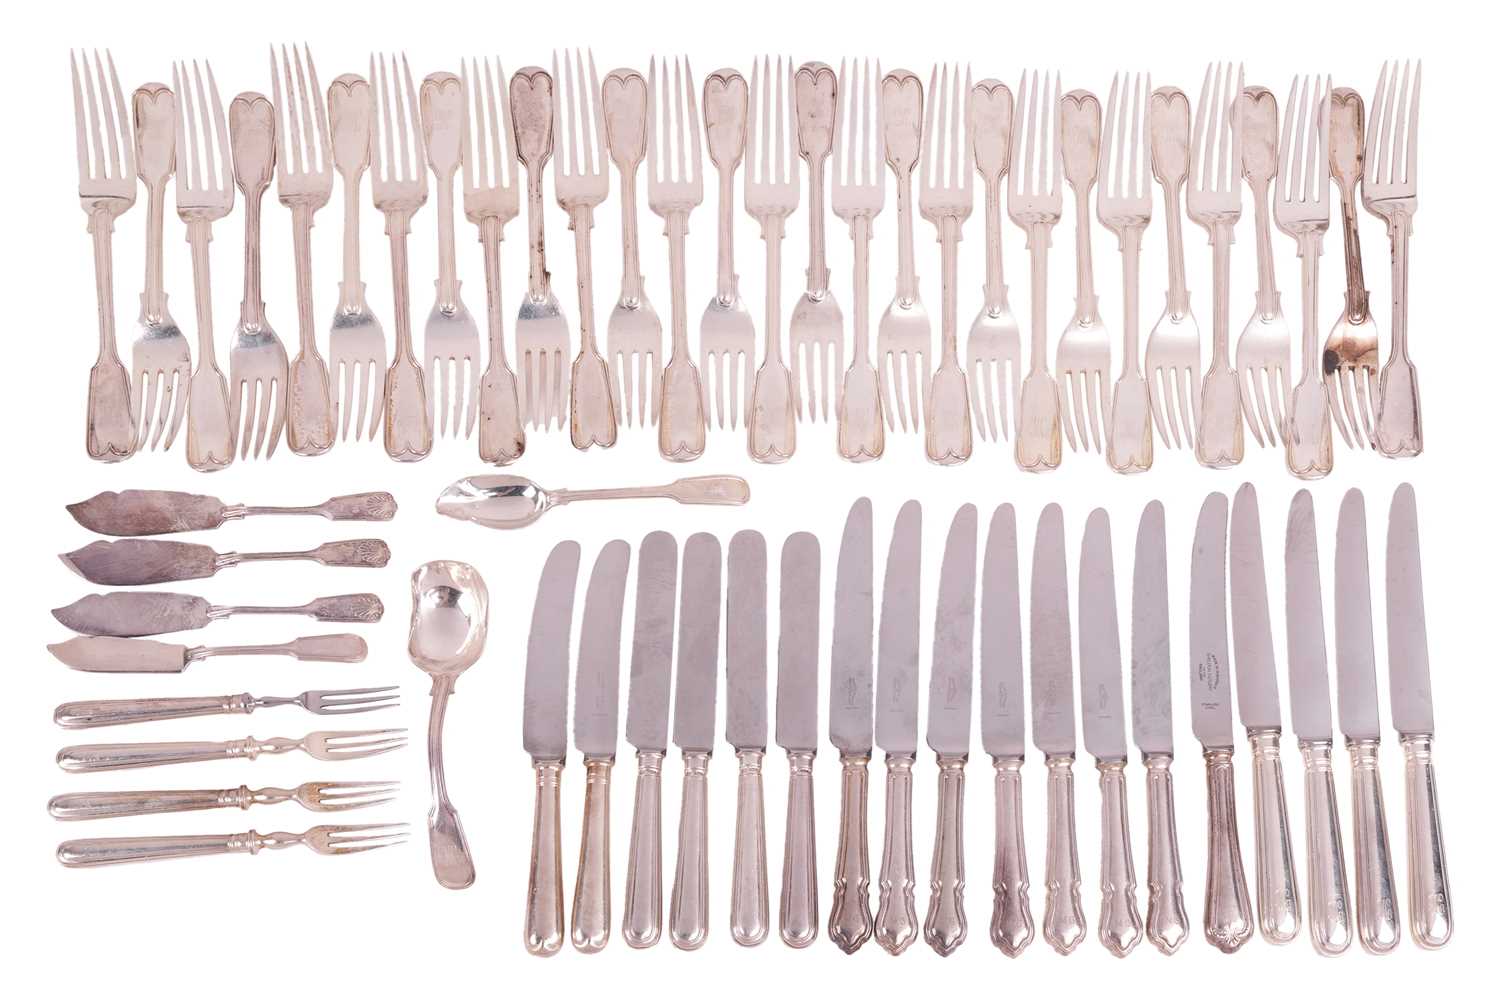 Aspreys silver flatware in fiddle and thread pattern engraved with initials, comprising twenty-nine 